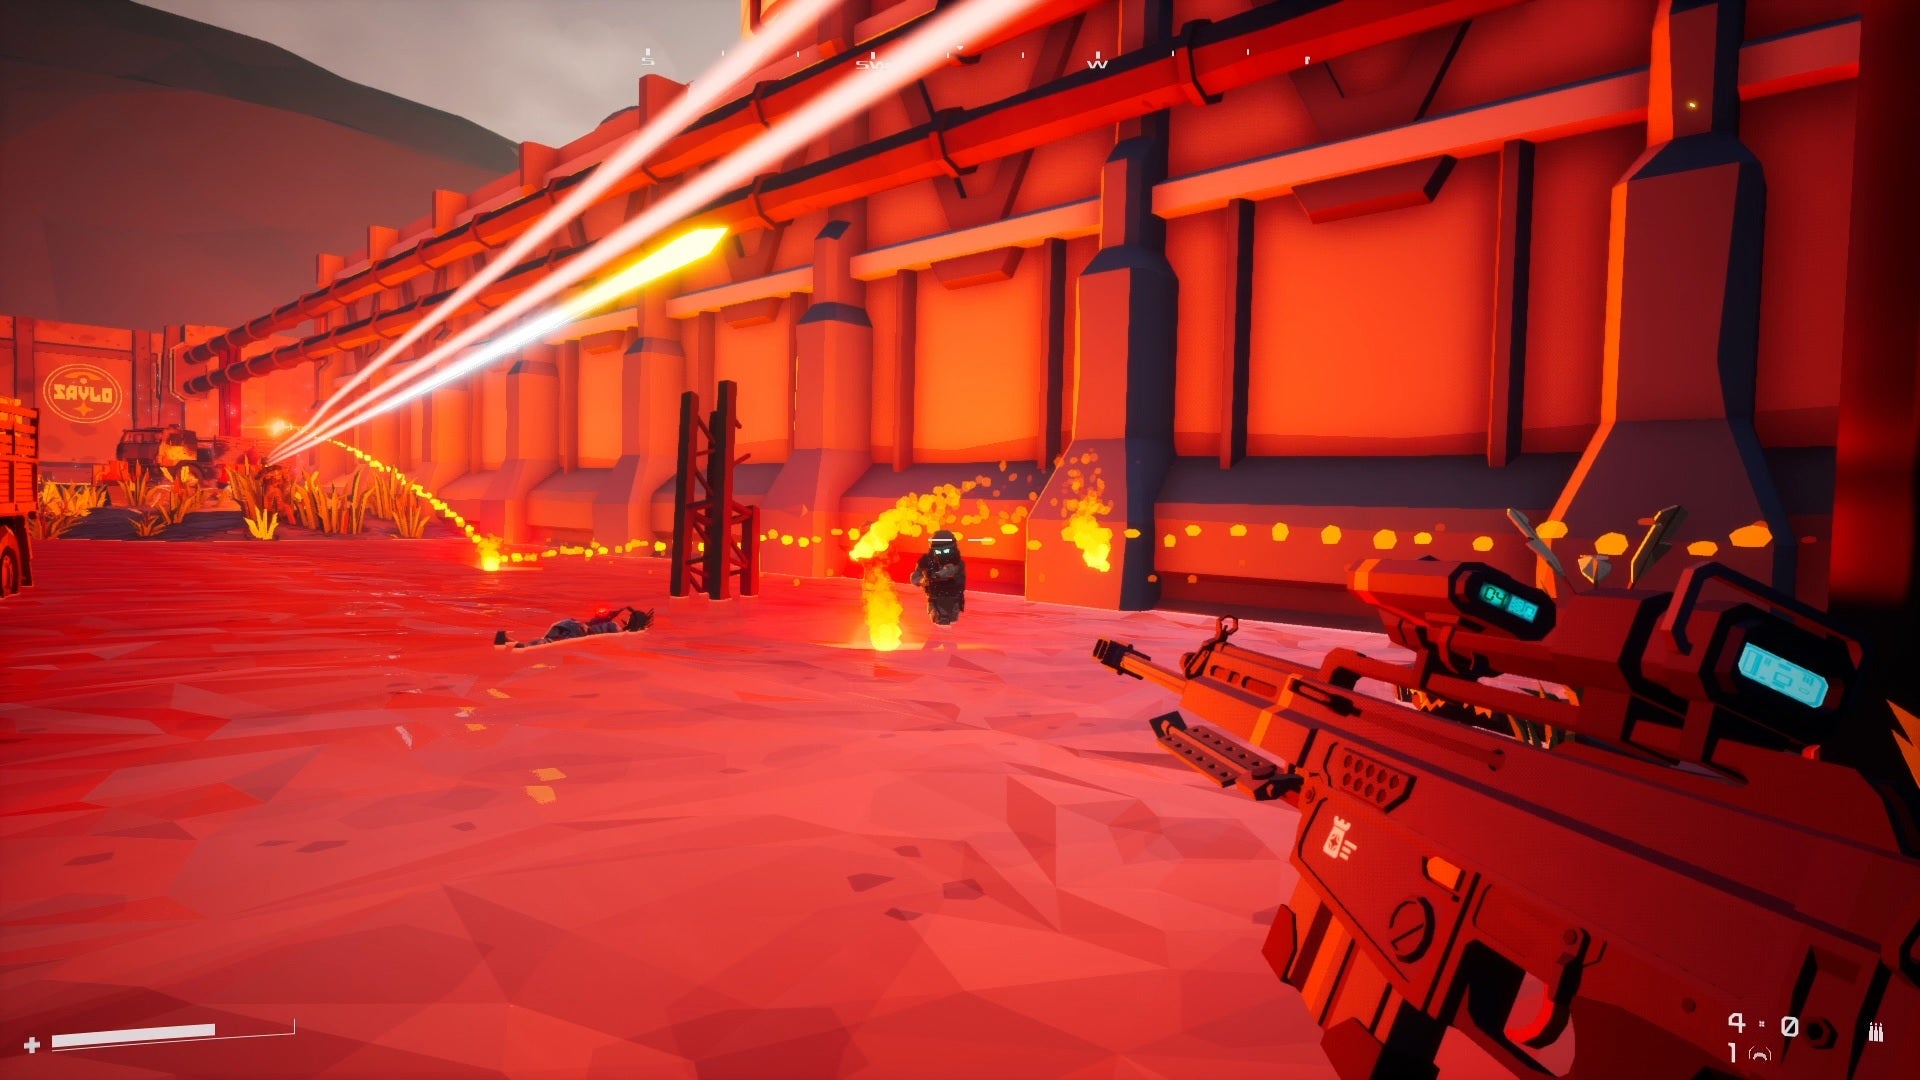 A small angry figure aims at the player in a fiery industrial scene in ADACA